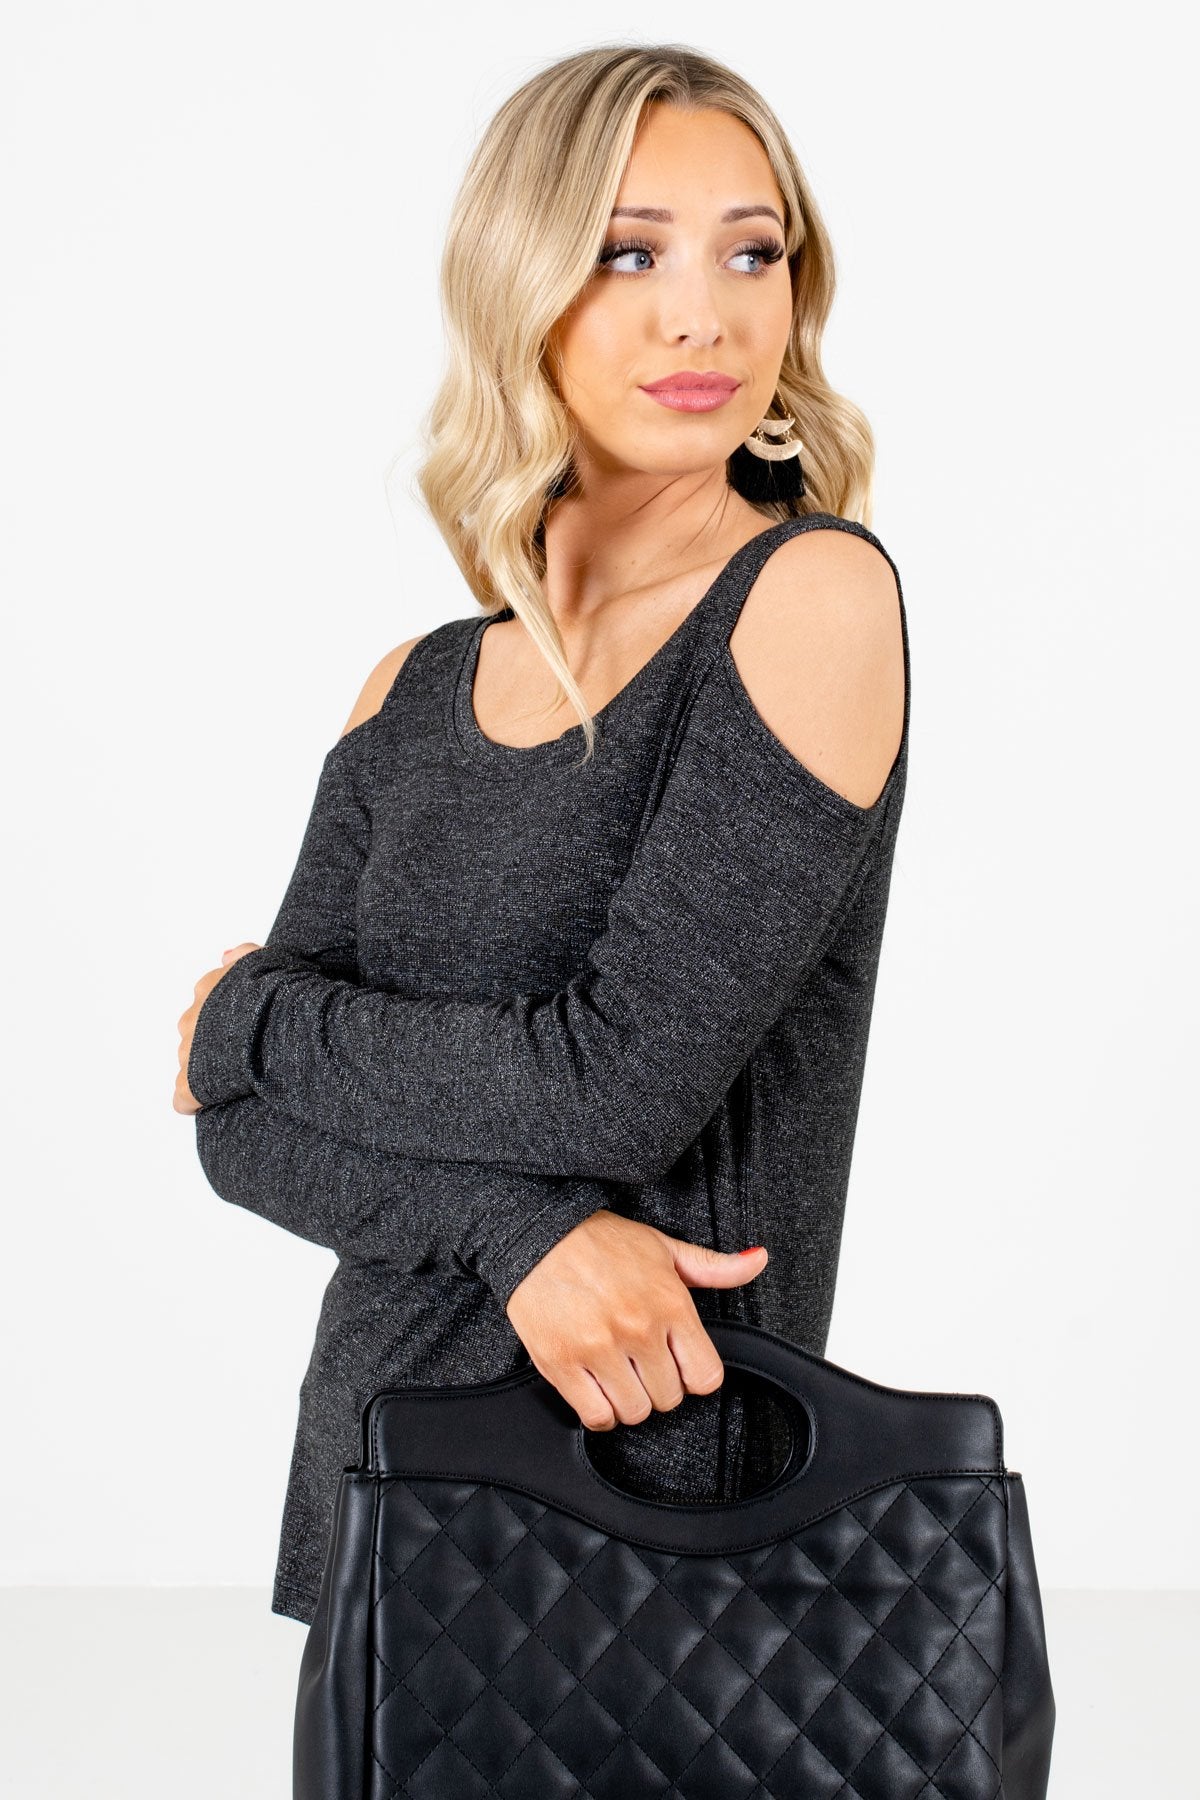 Black Warm and Cozy Boutique Tops for Women